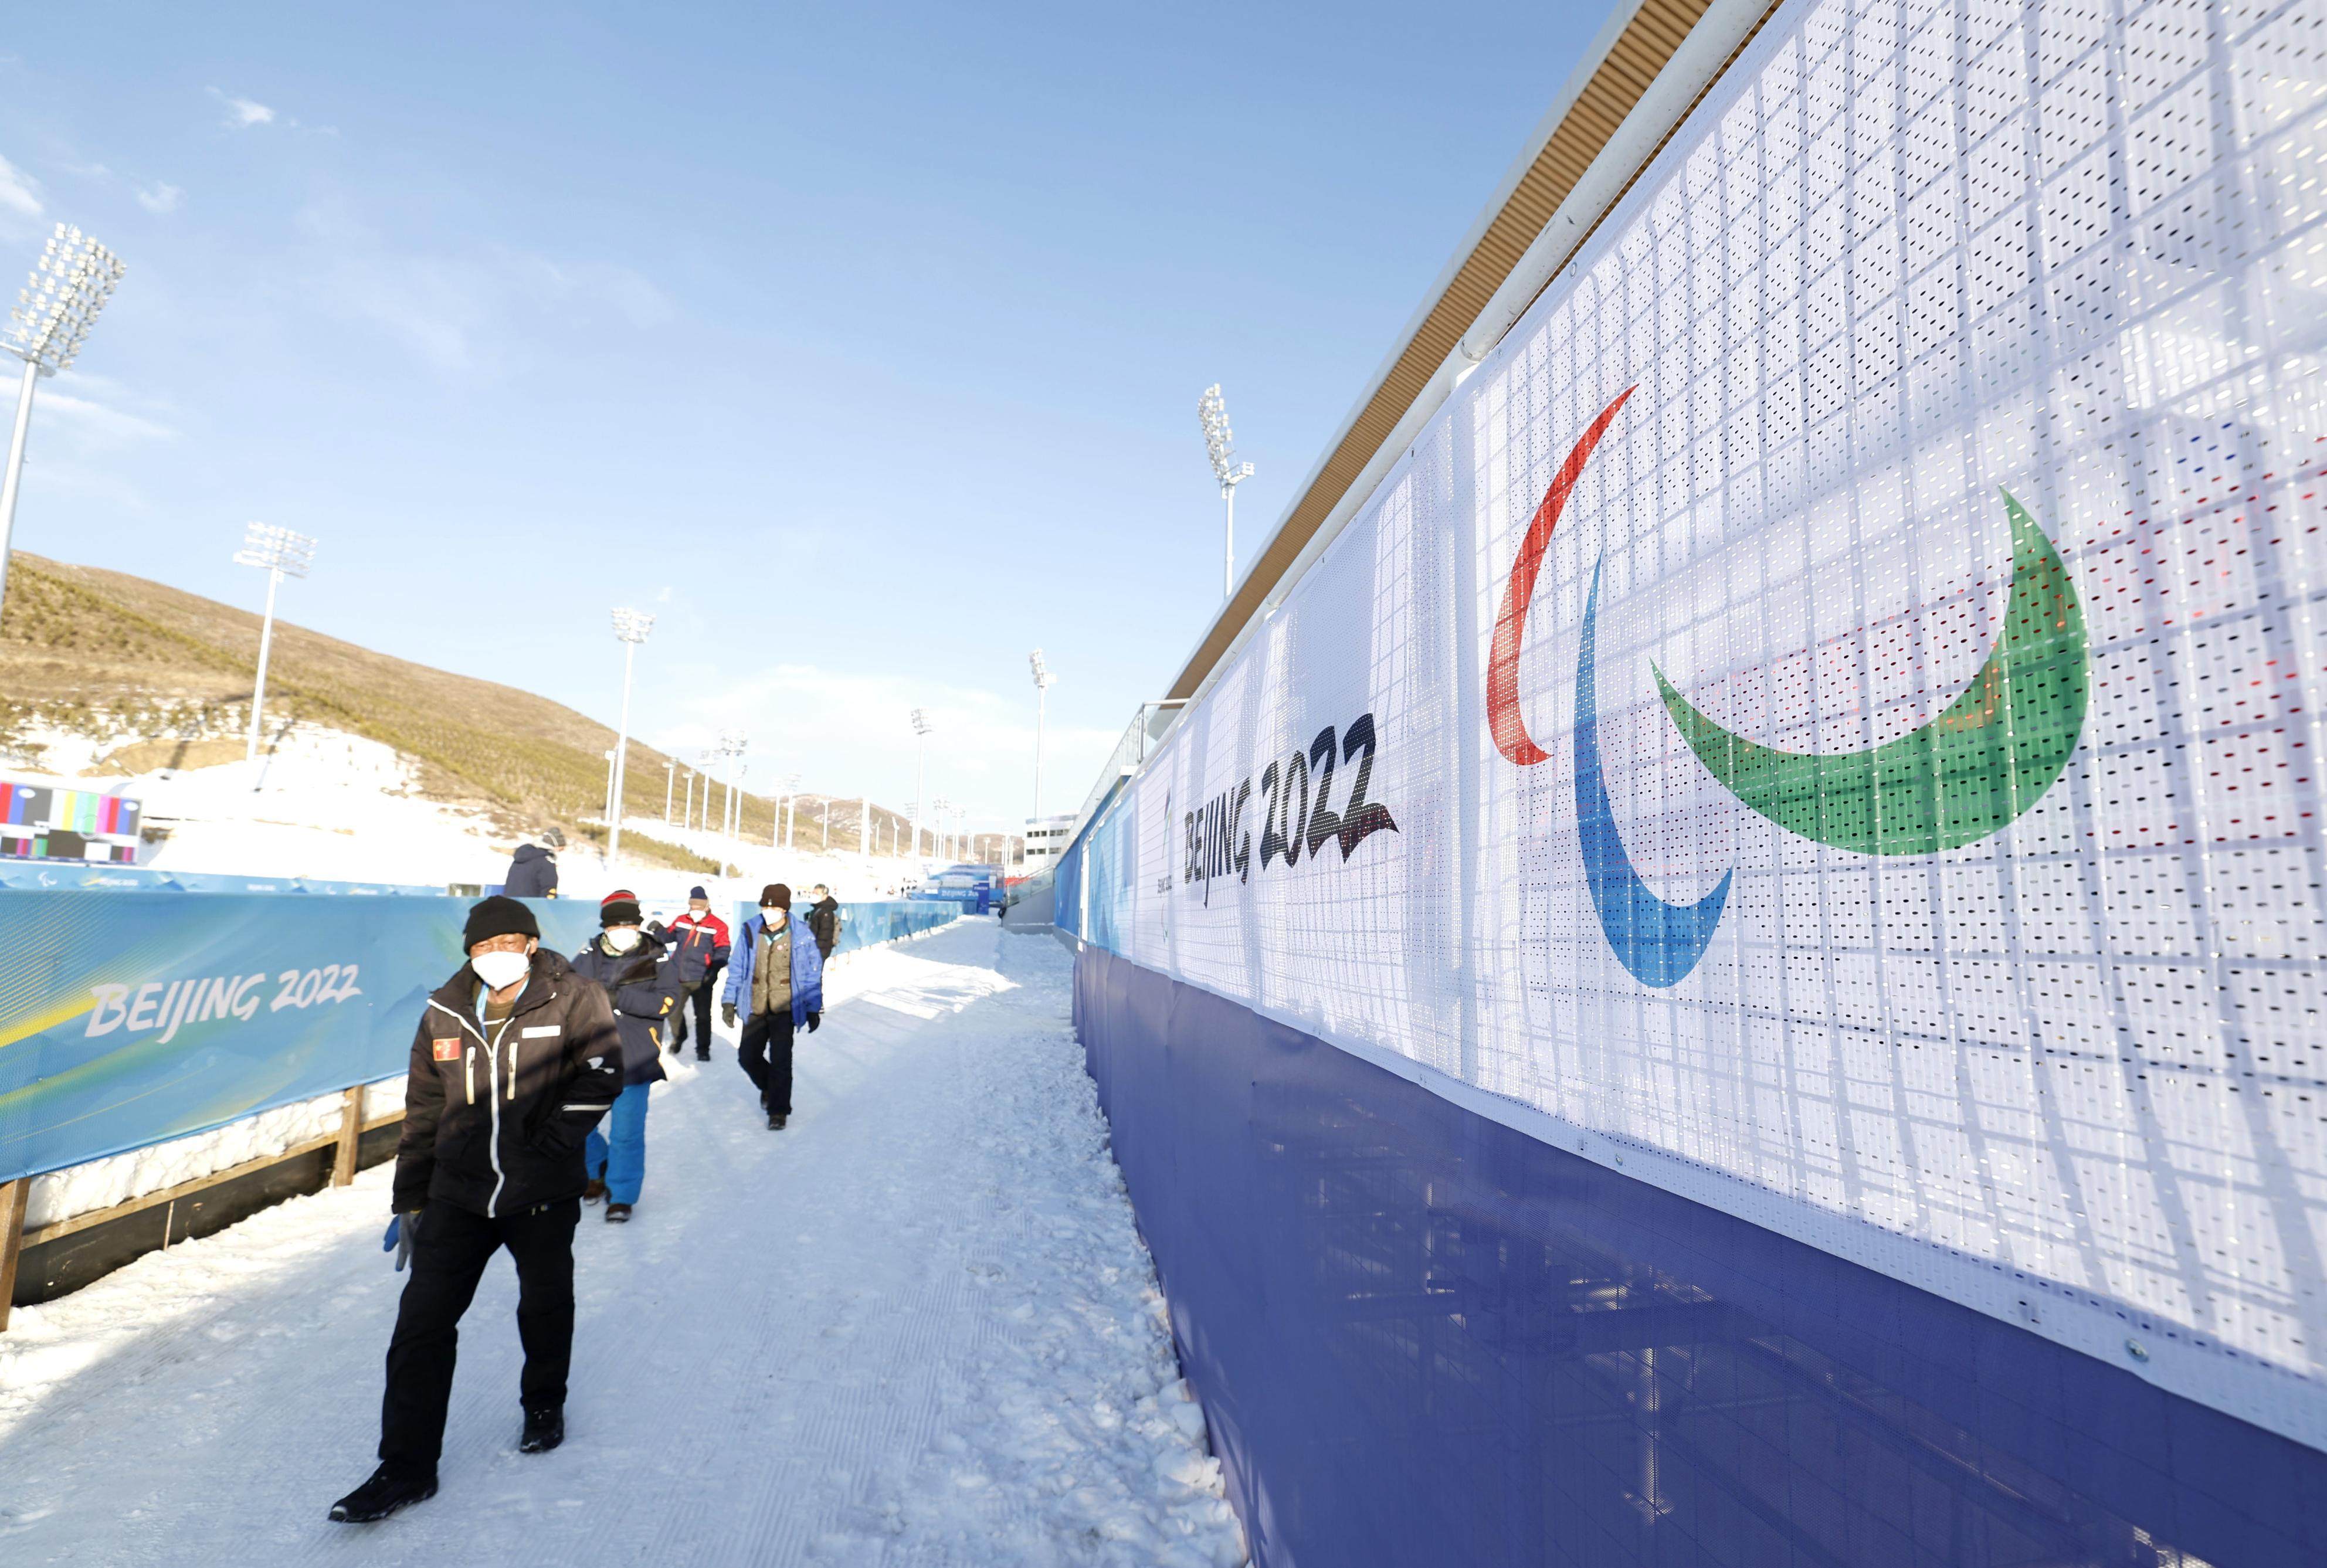 The Paralympic symbol featuring the red, blue and green Agitos  (Latin for “I move”) is visible at the competition venue for biathlon and cross-country skiing in Zhangjiakou, China, ahead of the March 4 opening of the Beijing Winter Paralympics. Photo: Kyodo